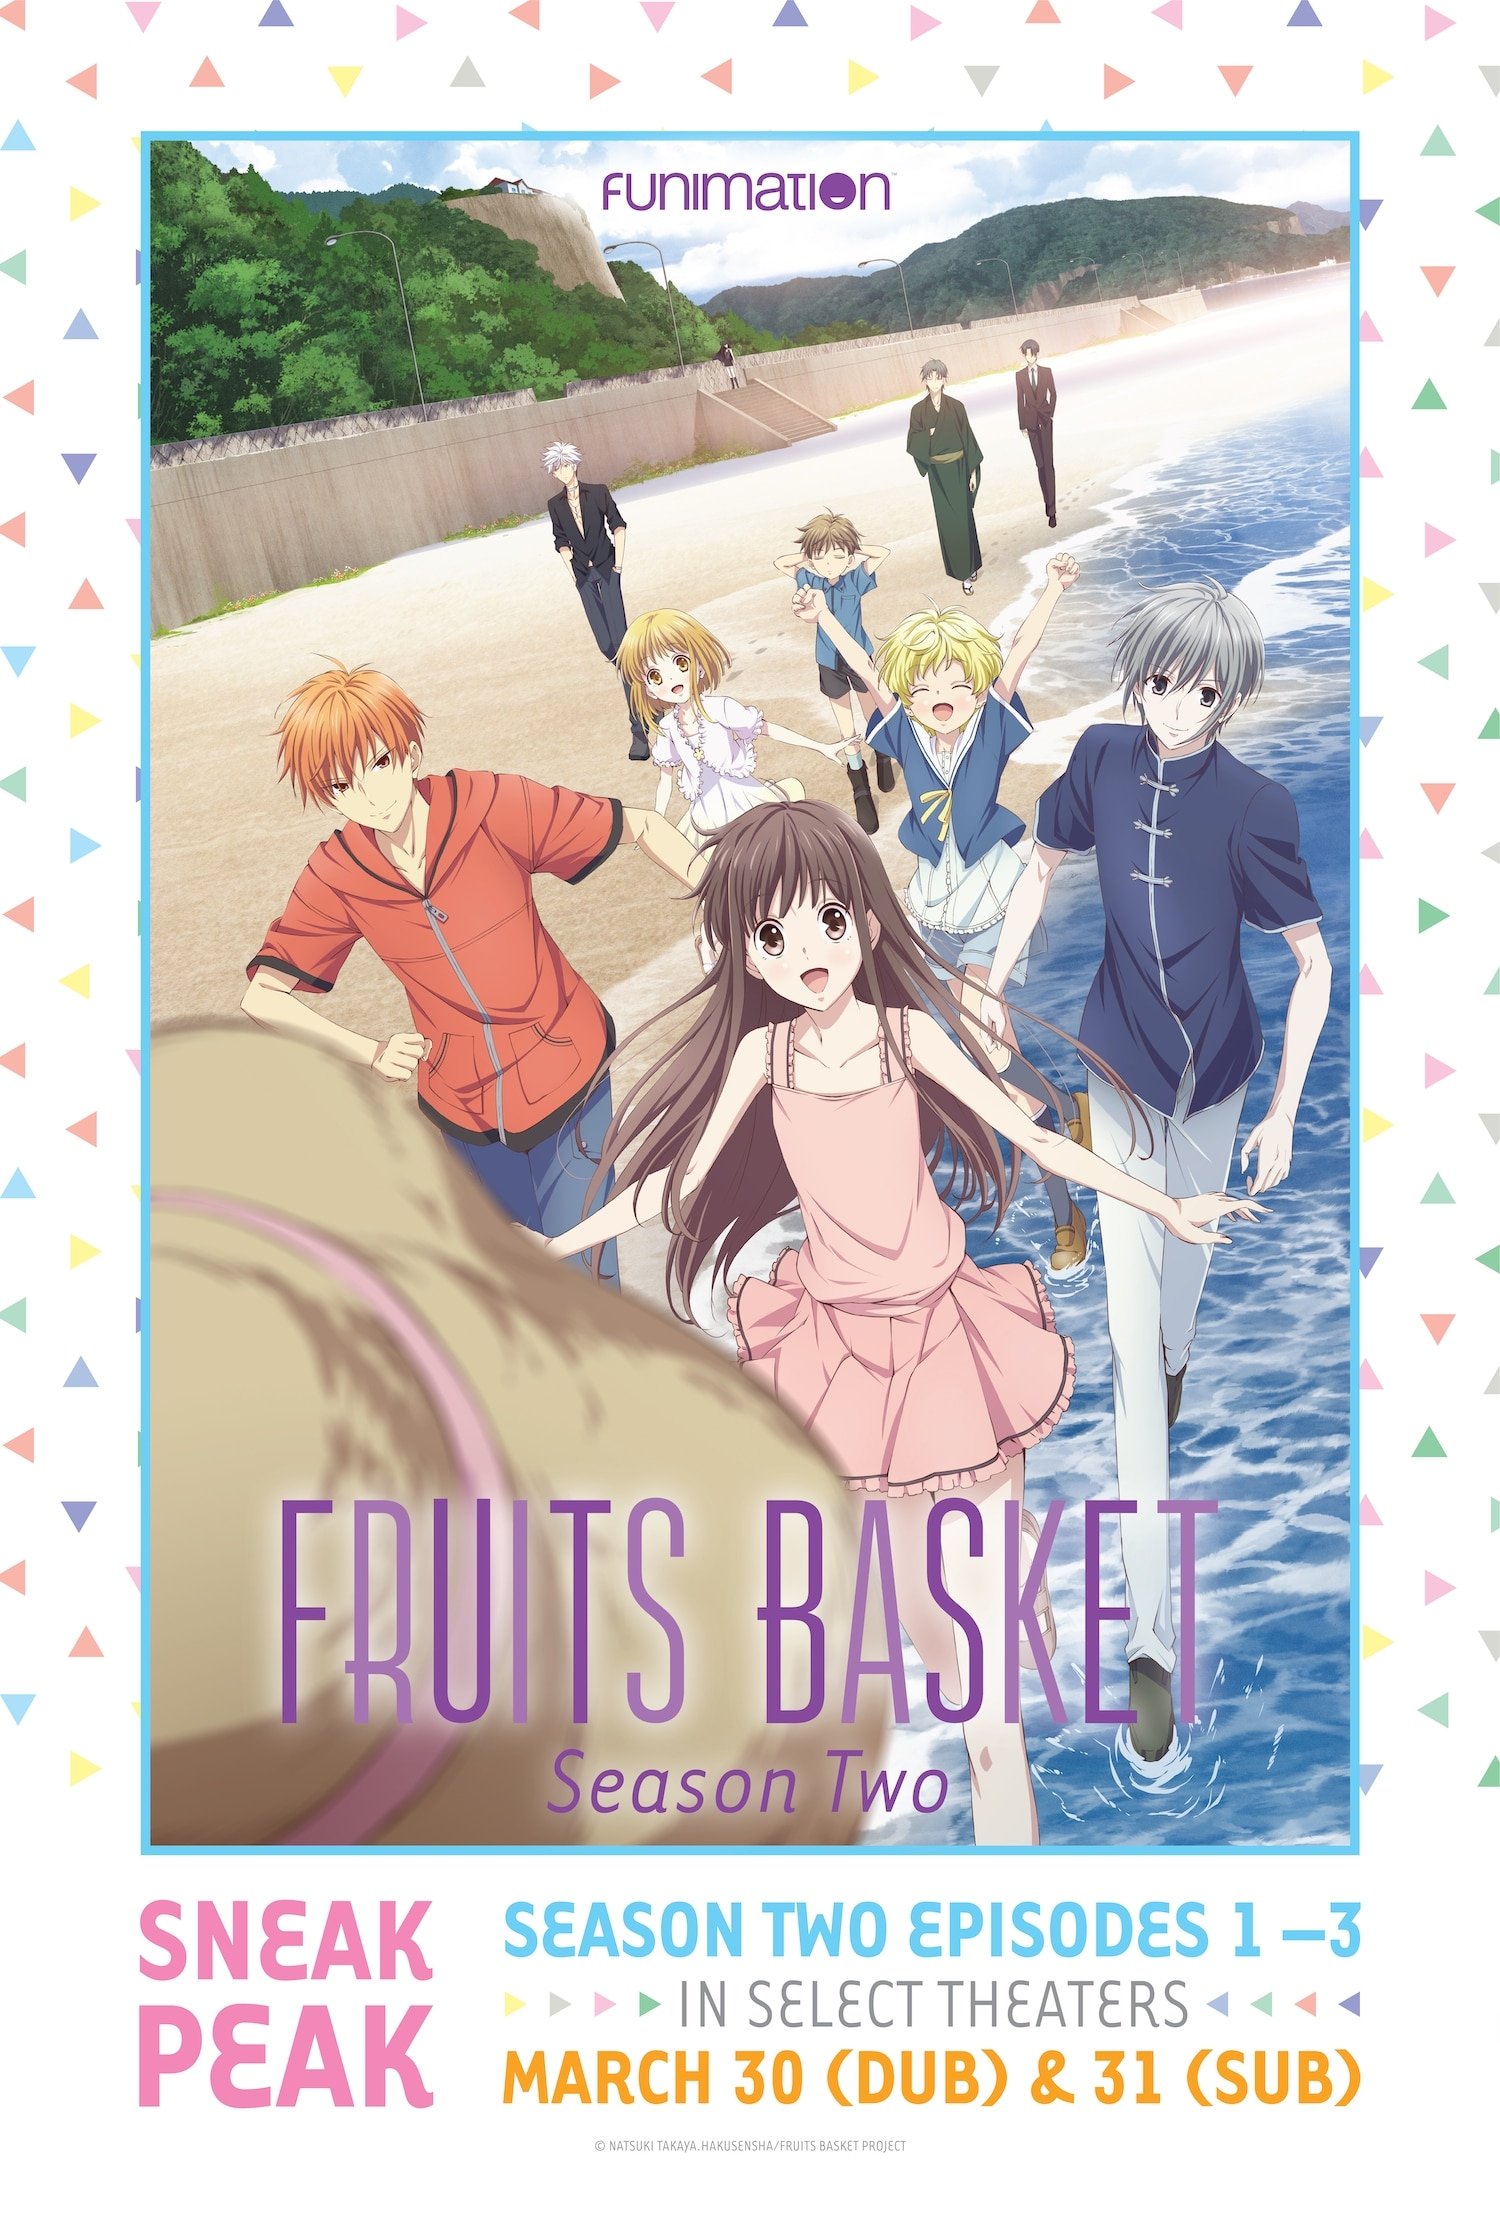 Fruits Basket  Watch on Funimation